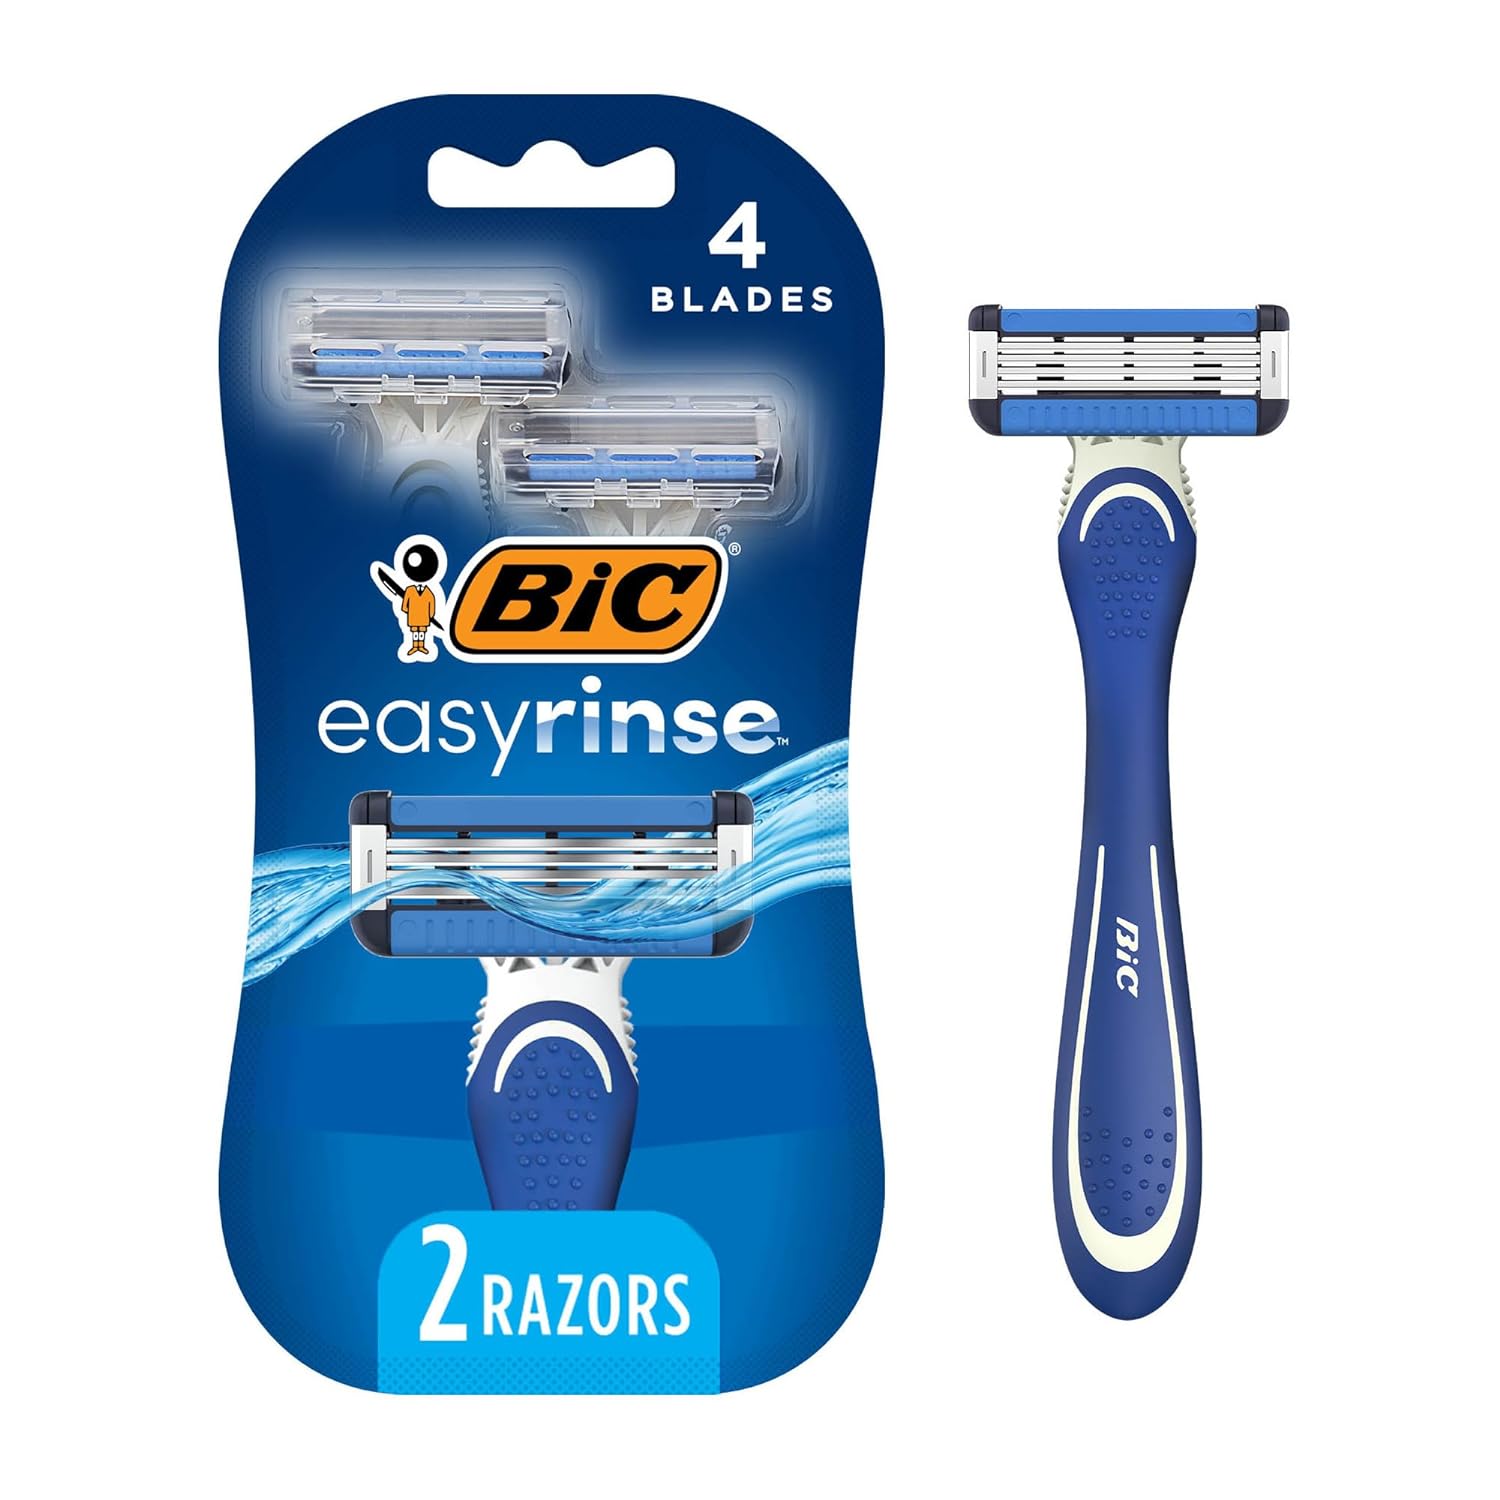 BIC EasyRinse Anti-Clogging Men' Disposable Razors for a Smoother Shave With Less Irritation*, Easy Rinse Shaving Razors With 4 Blades, 2 Count